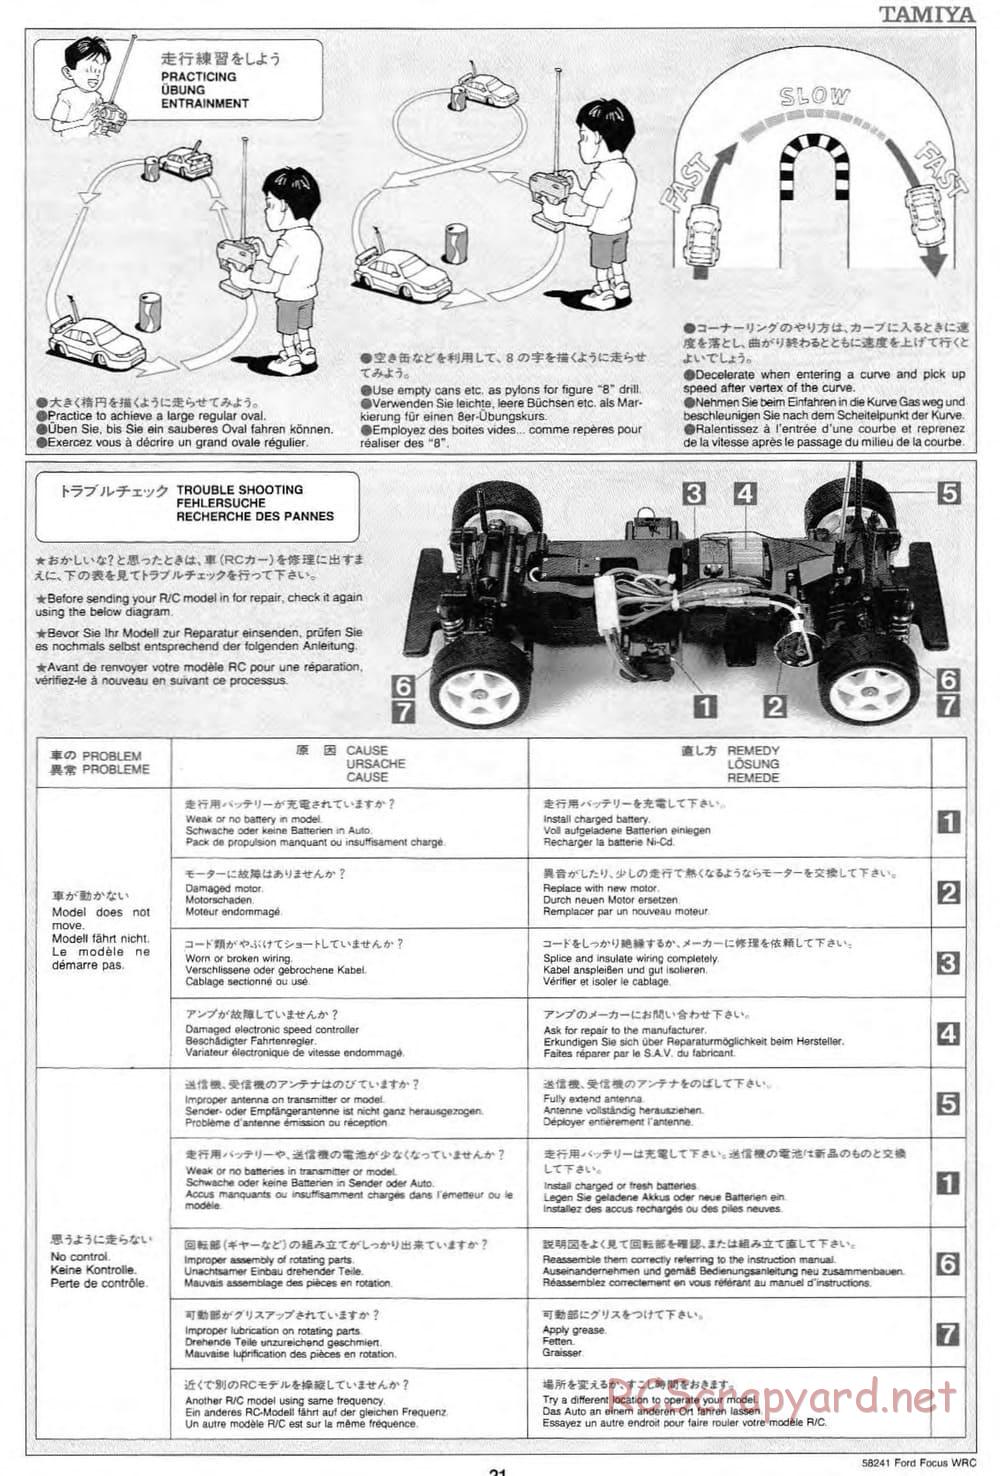 Tamiya - Ford Focus WRC - TL-01 Chassis - Manual - Page 21